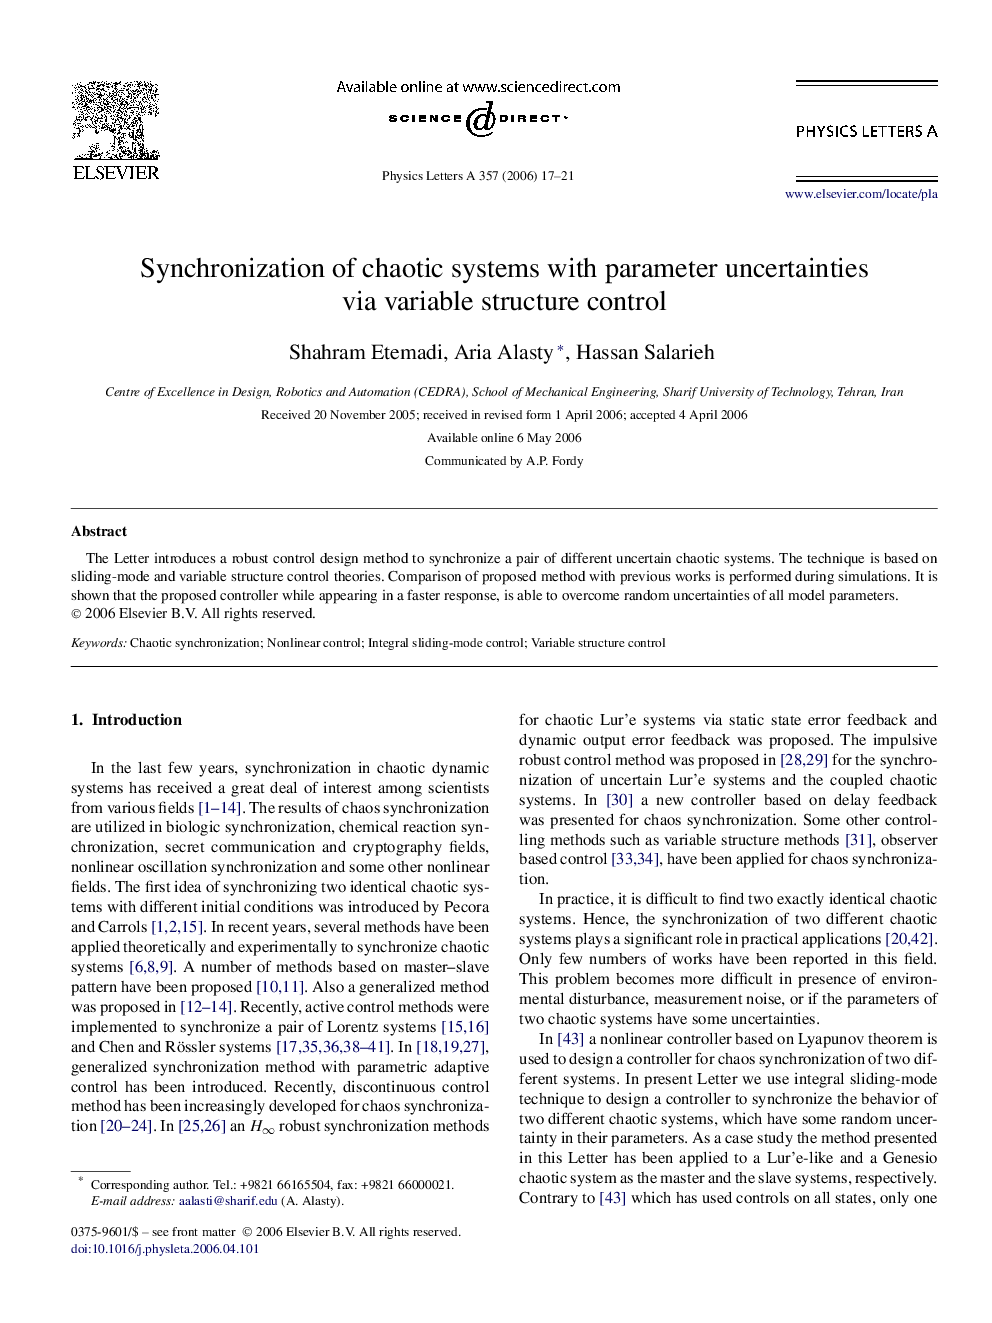 Synchronization of chaotic systems with parameter uncertainties via variable structure control